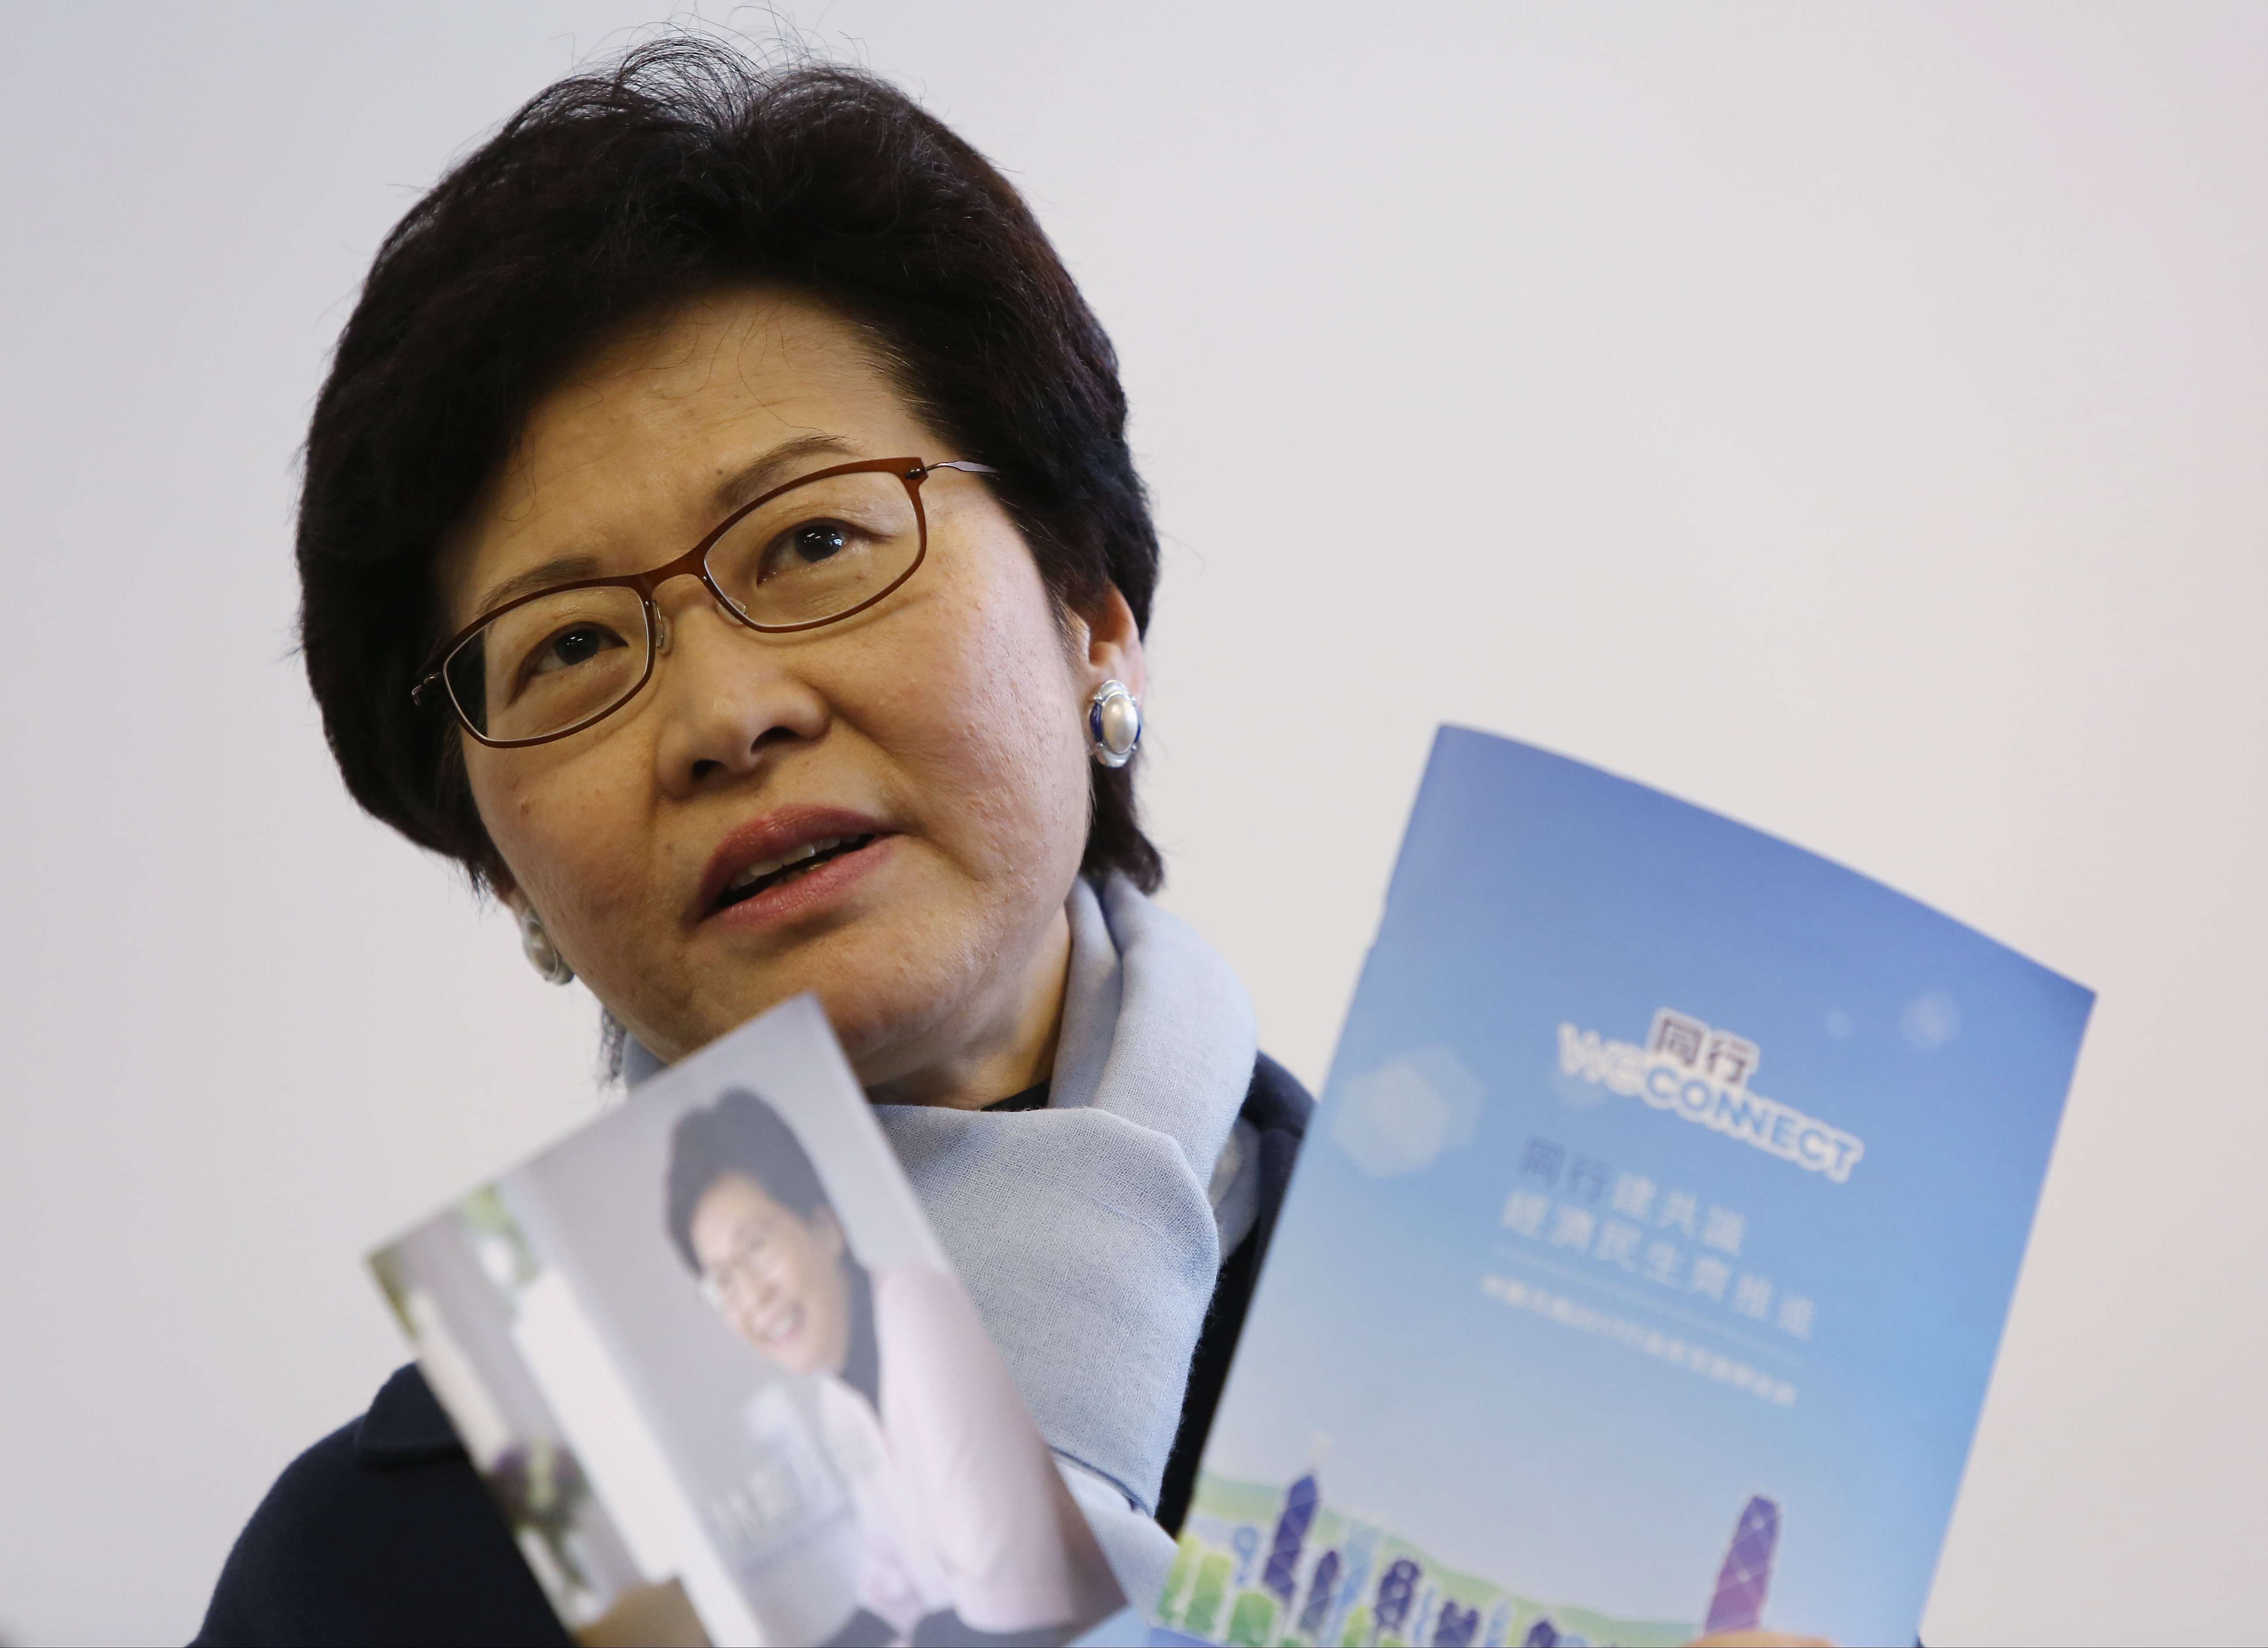 Chief executive candidate Carrie Lam Cheng Yuet-ngor has sought to downplay the controversy over her remarks. Photo: K. Y. Cheng